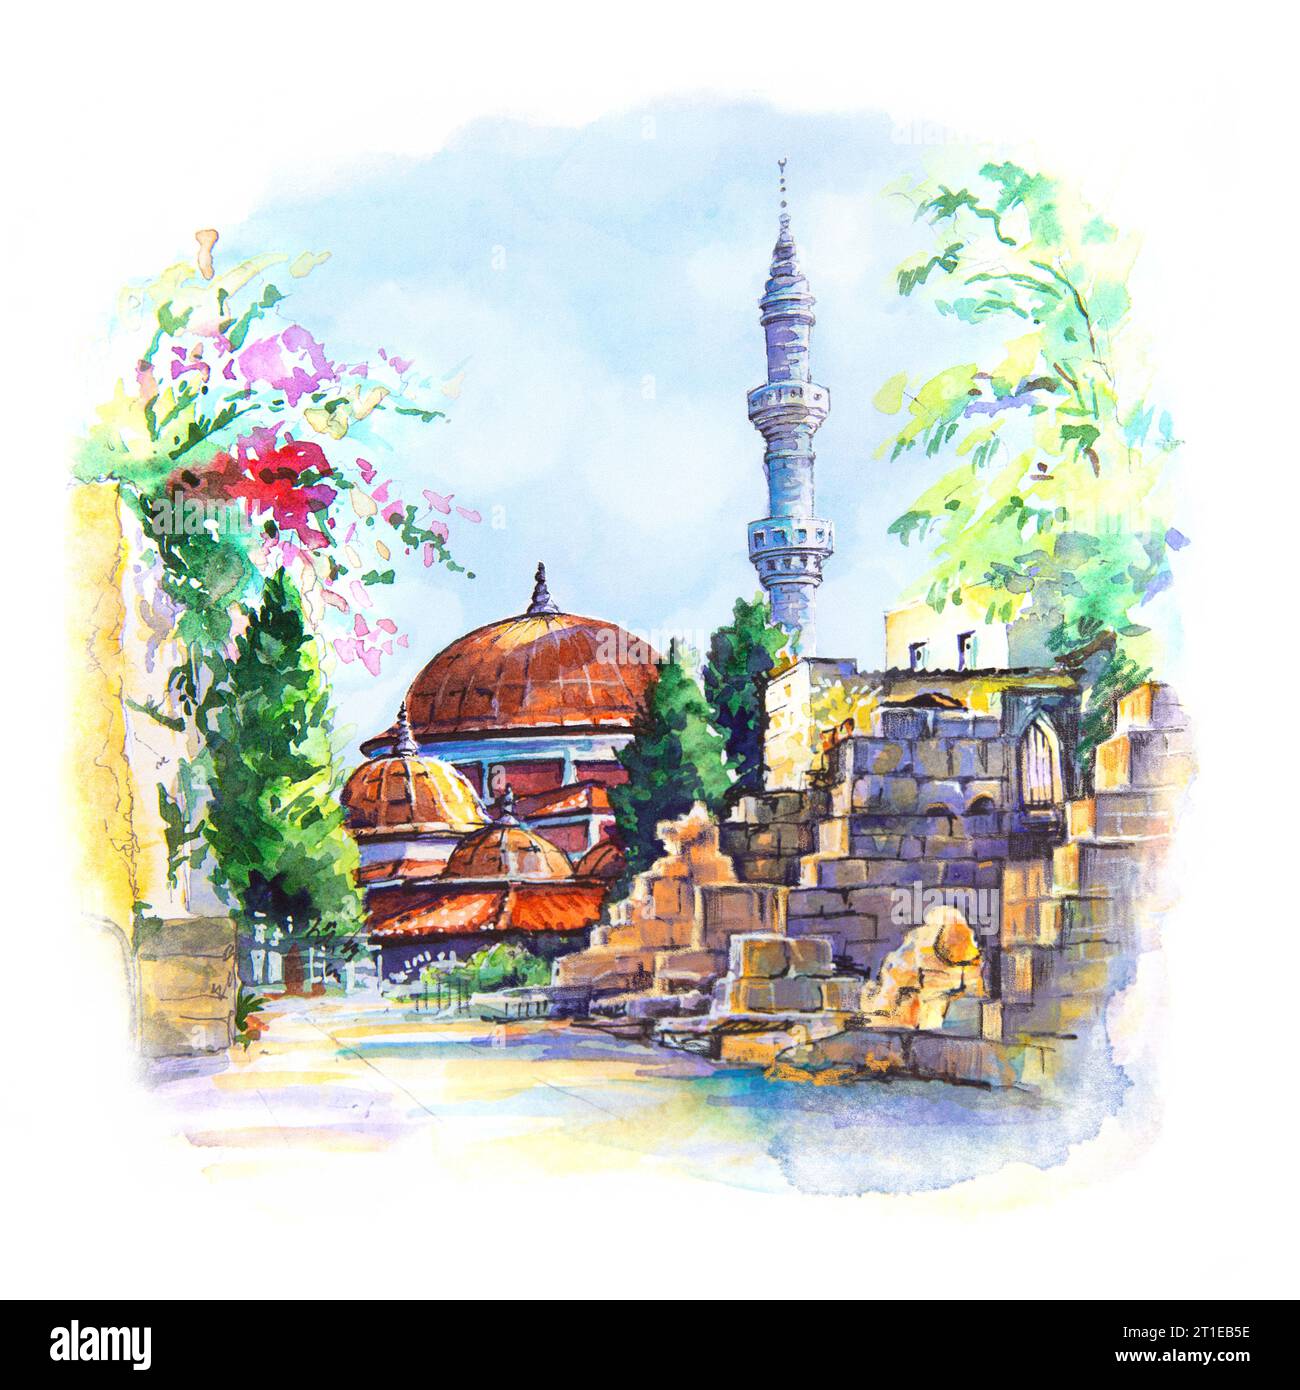 Watercolor sketch of Suleymaniye Mosque on Rhodes, Dodecanese islands, Island of the Sun, Greece Stock Photo